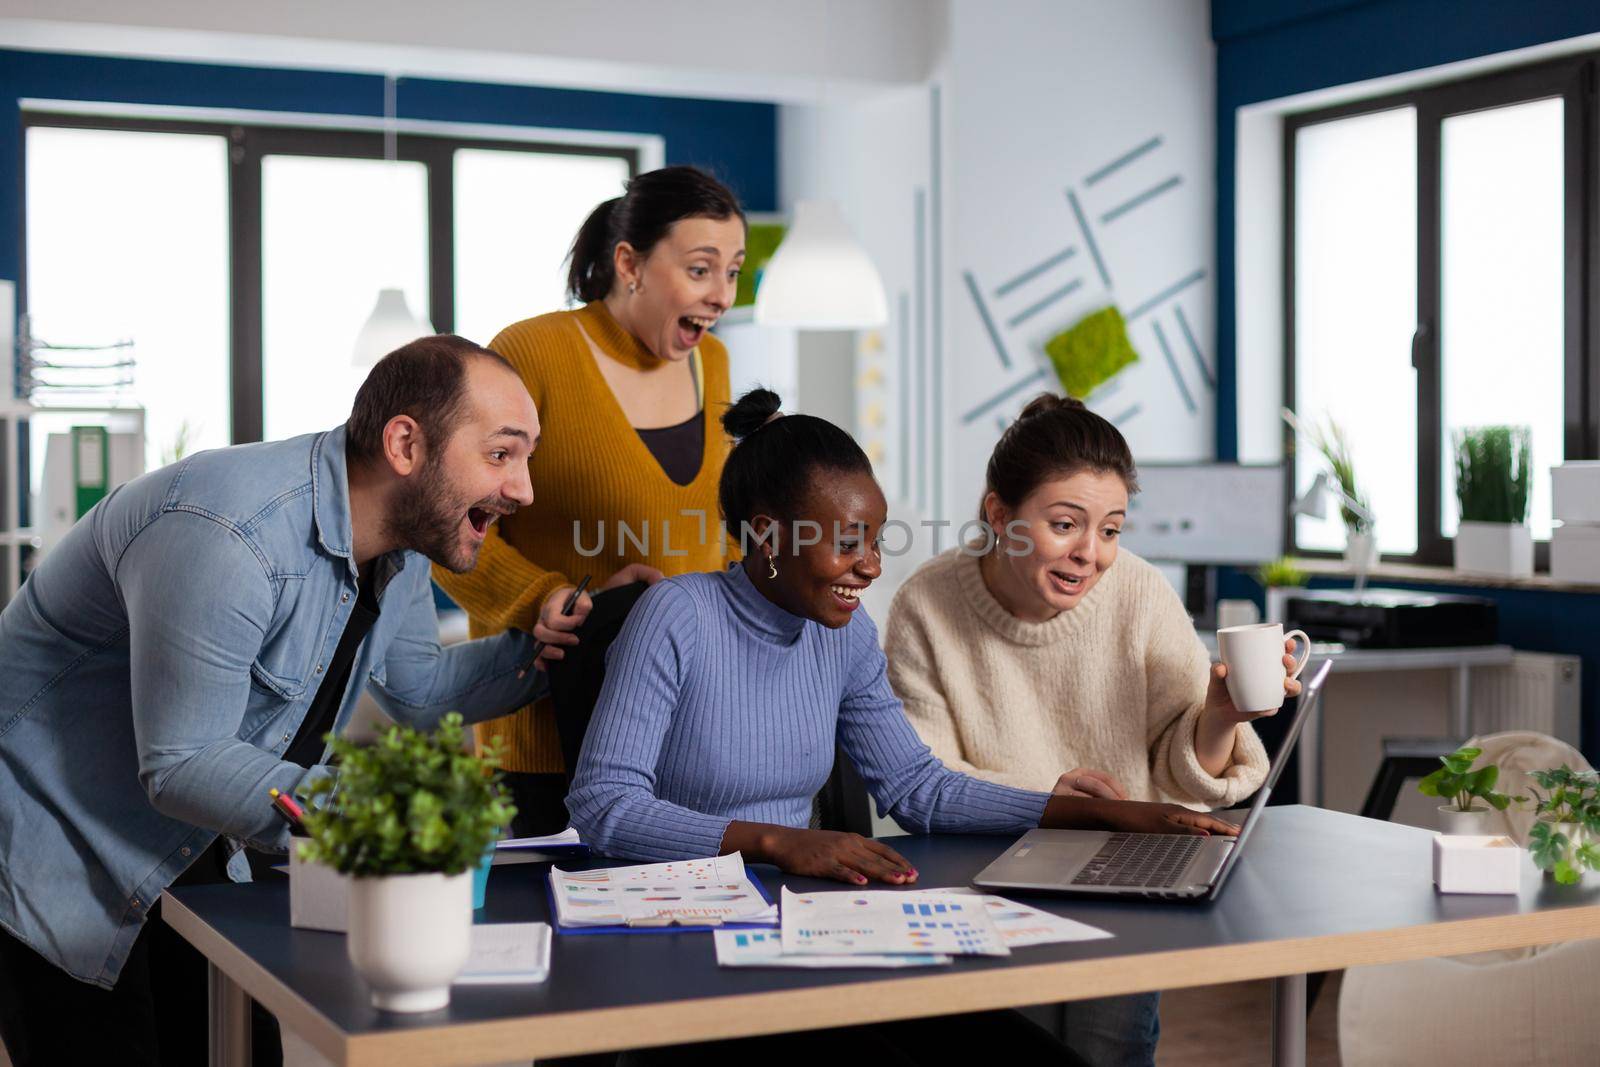 Joyful executive businessman and colleagues screaming in startup after client triumph. Multiethnic diverse positive business team with laptop and papers excited about project.